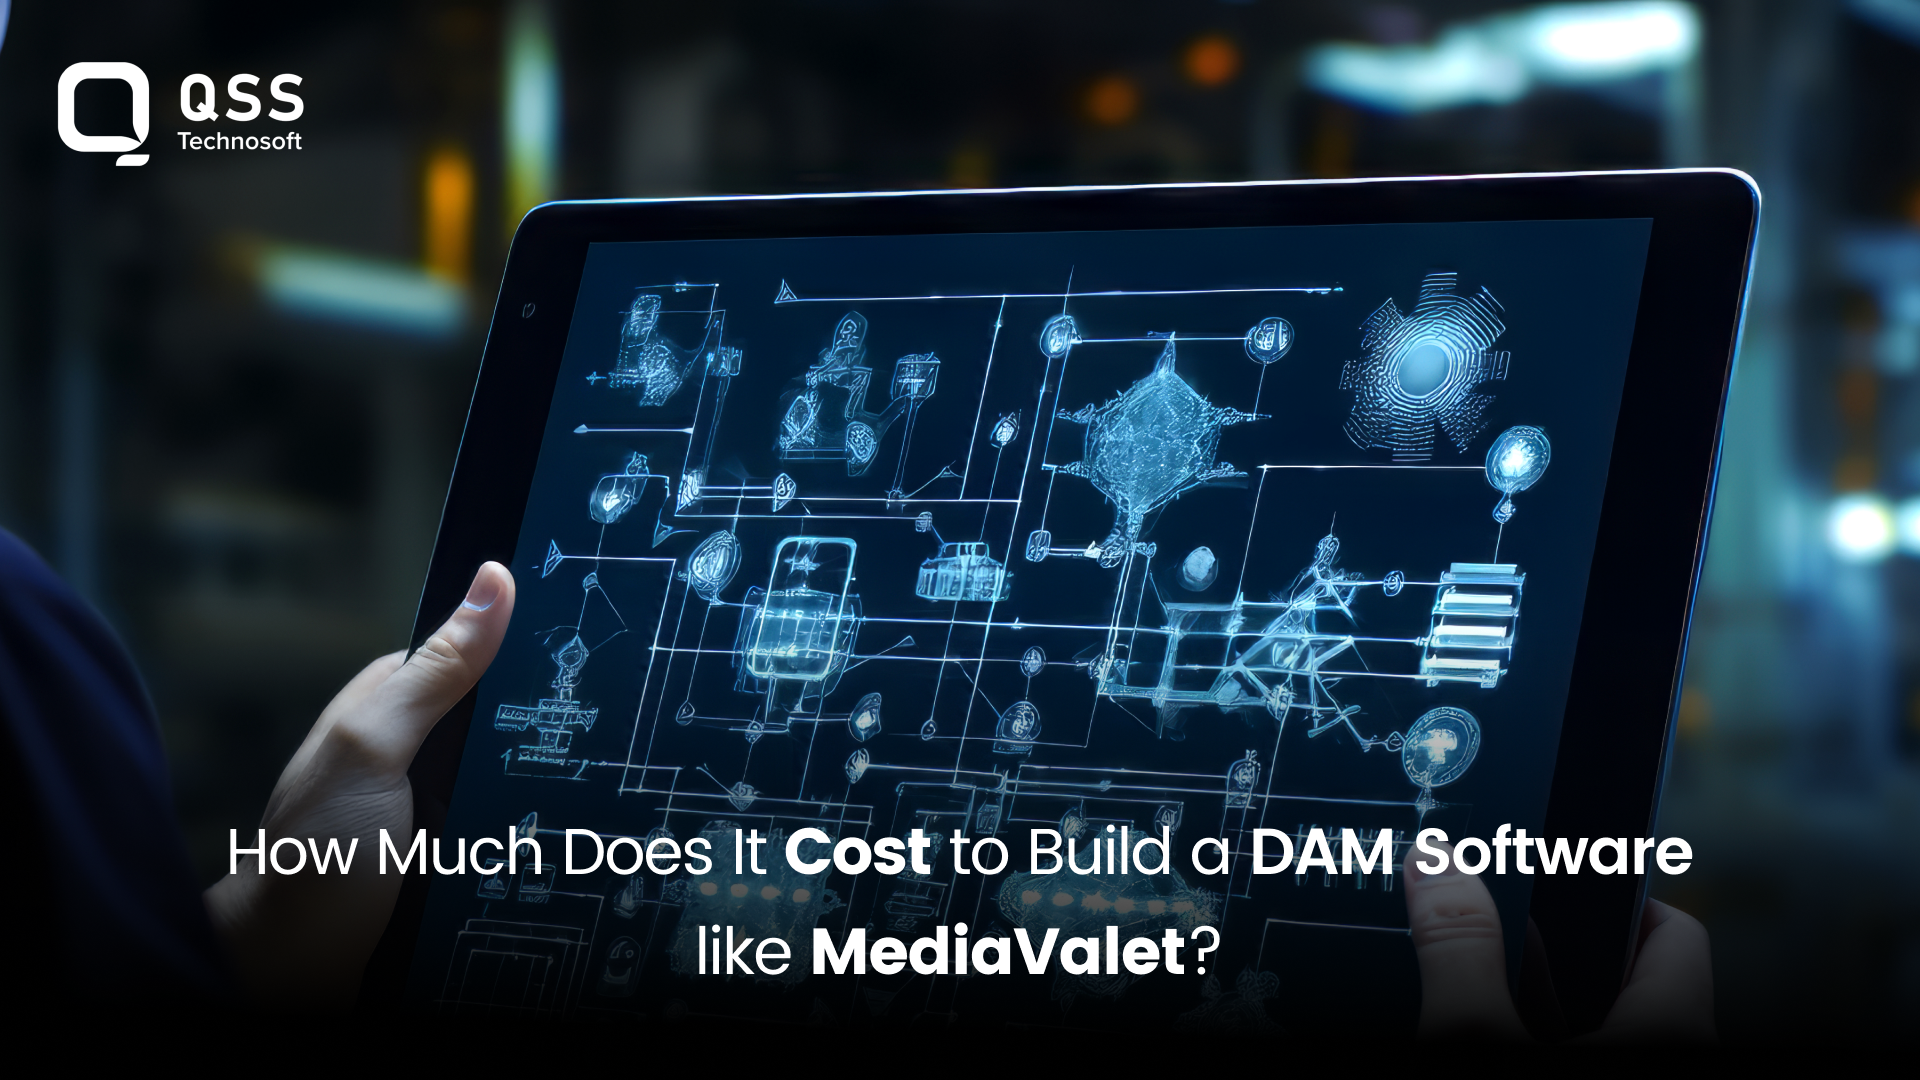 How Much Does It Cost to Build a DAM Software like MediaValet?